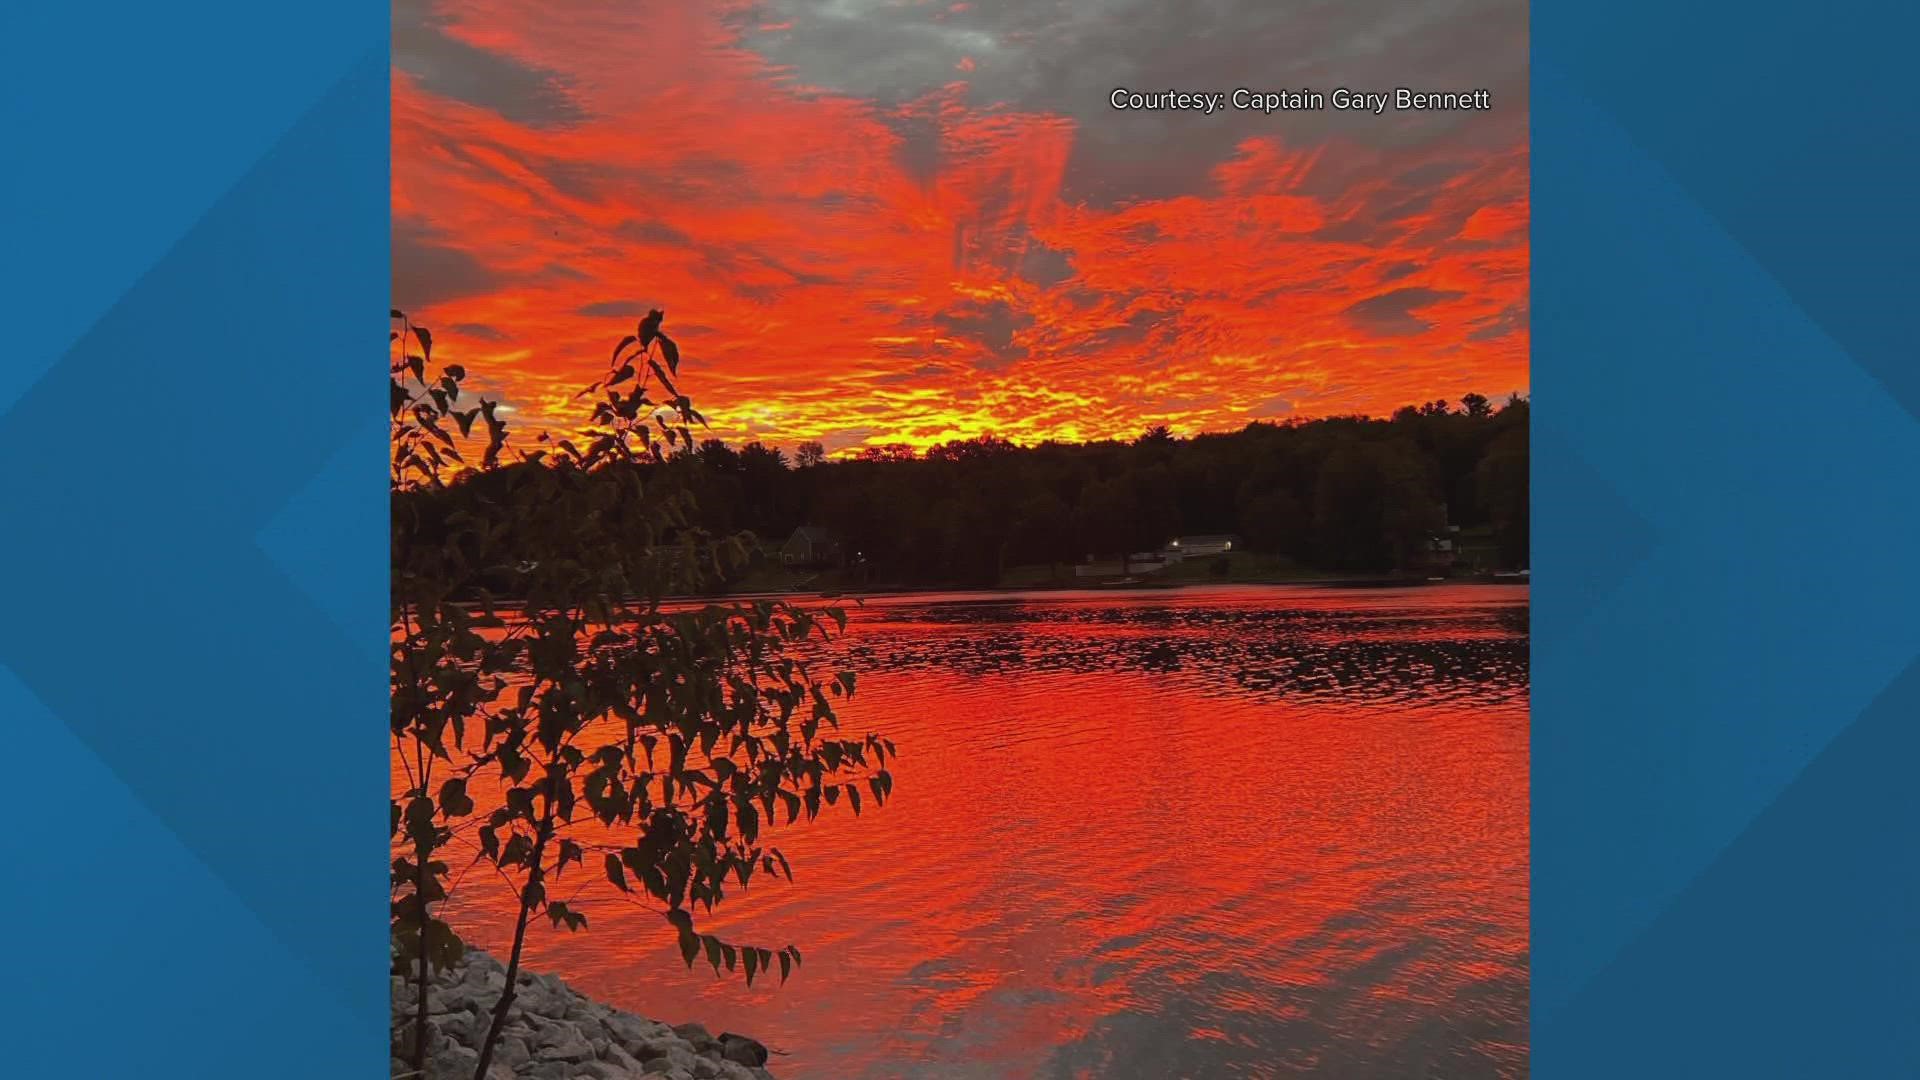 Mainers were dazzled by a vibrant sunrise Sept. 16 and shared images with NEWS CENTER Maine through the Near ME section of the app.